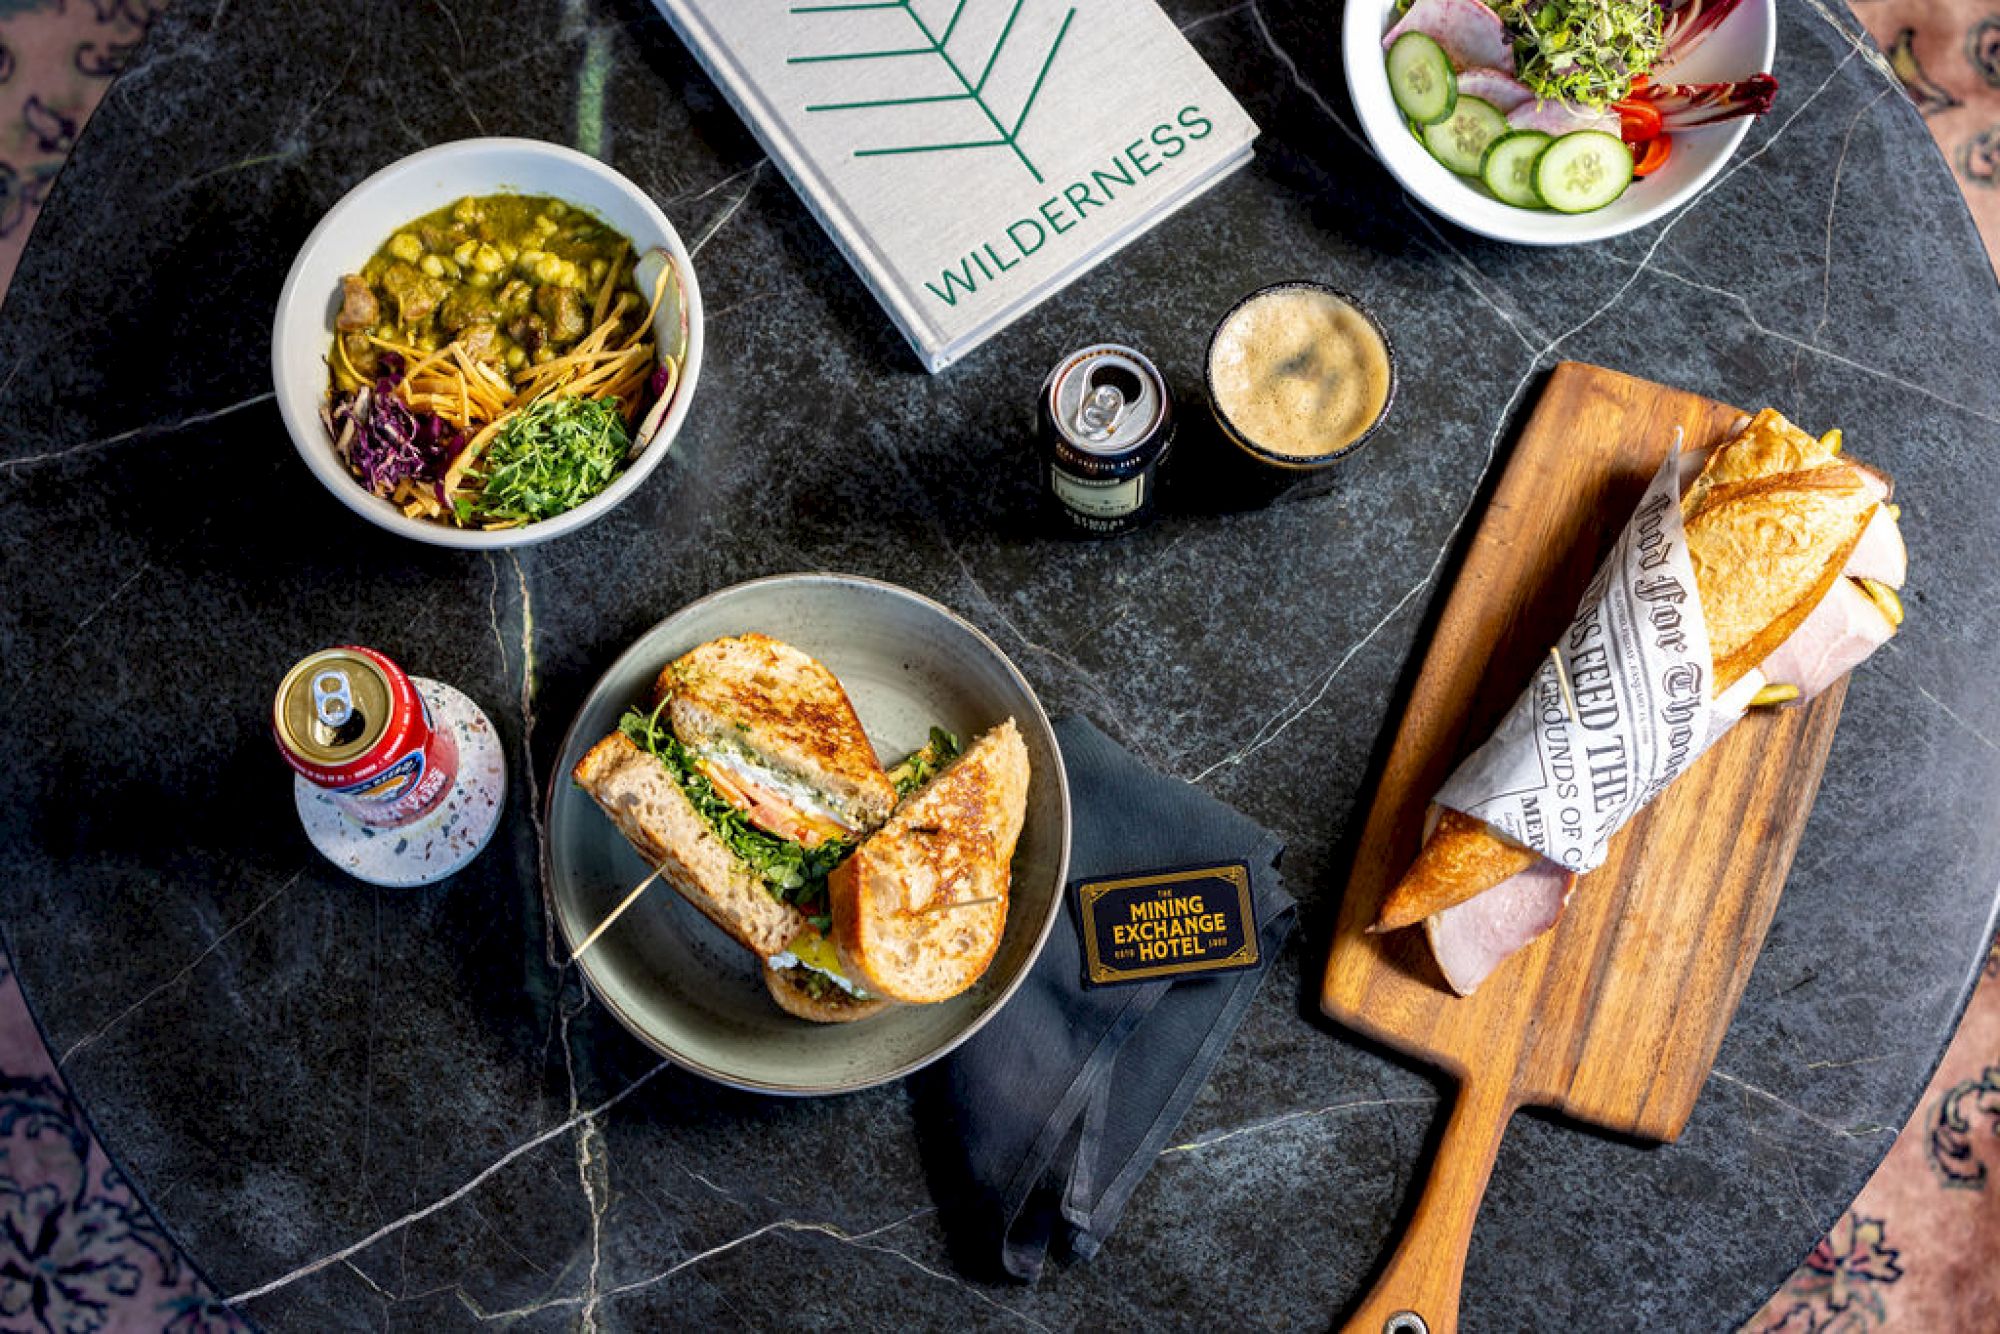 The image shows various food and drinks on a dark table, including sandwiches, a bowl, a can of drink, a coffee, a book, and a wooden board.